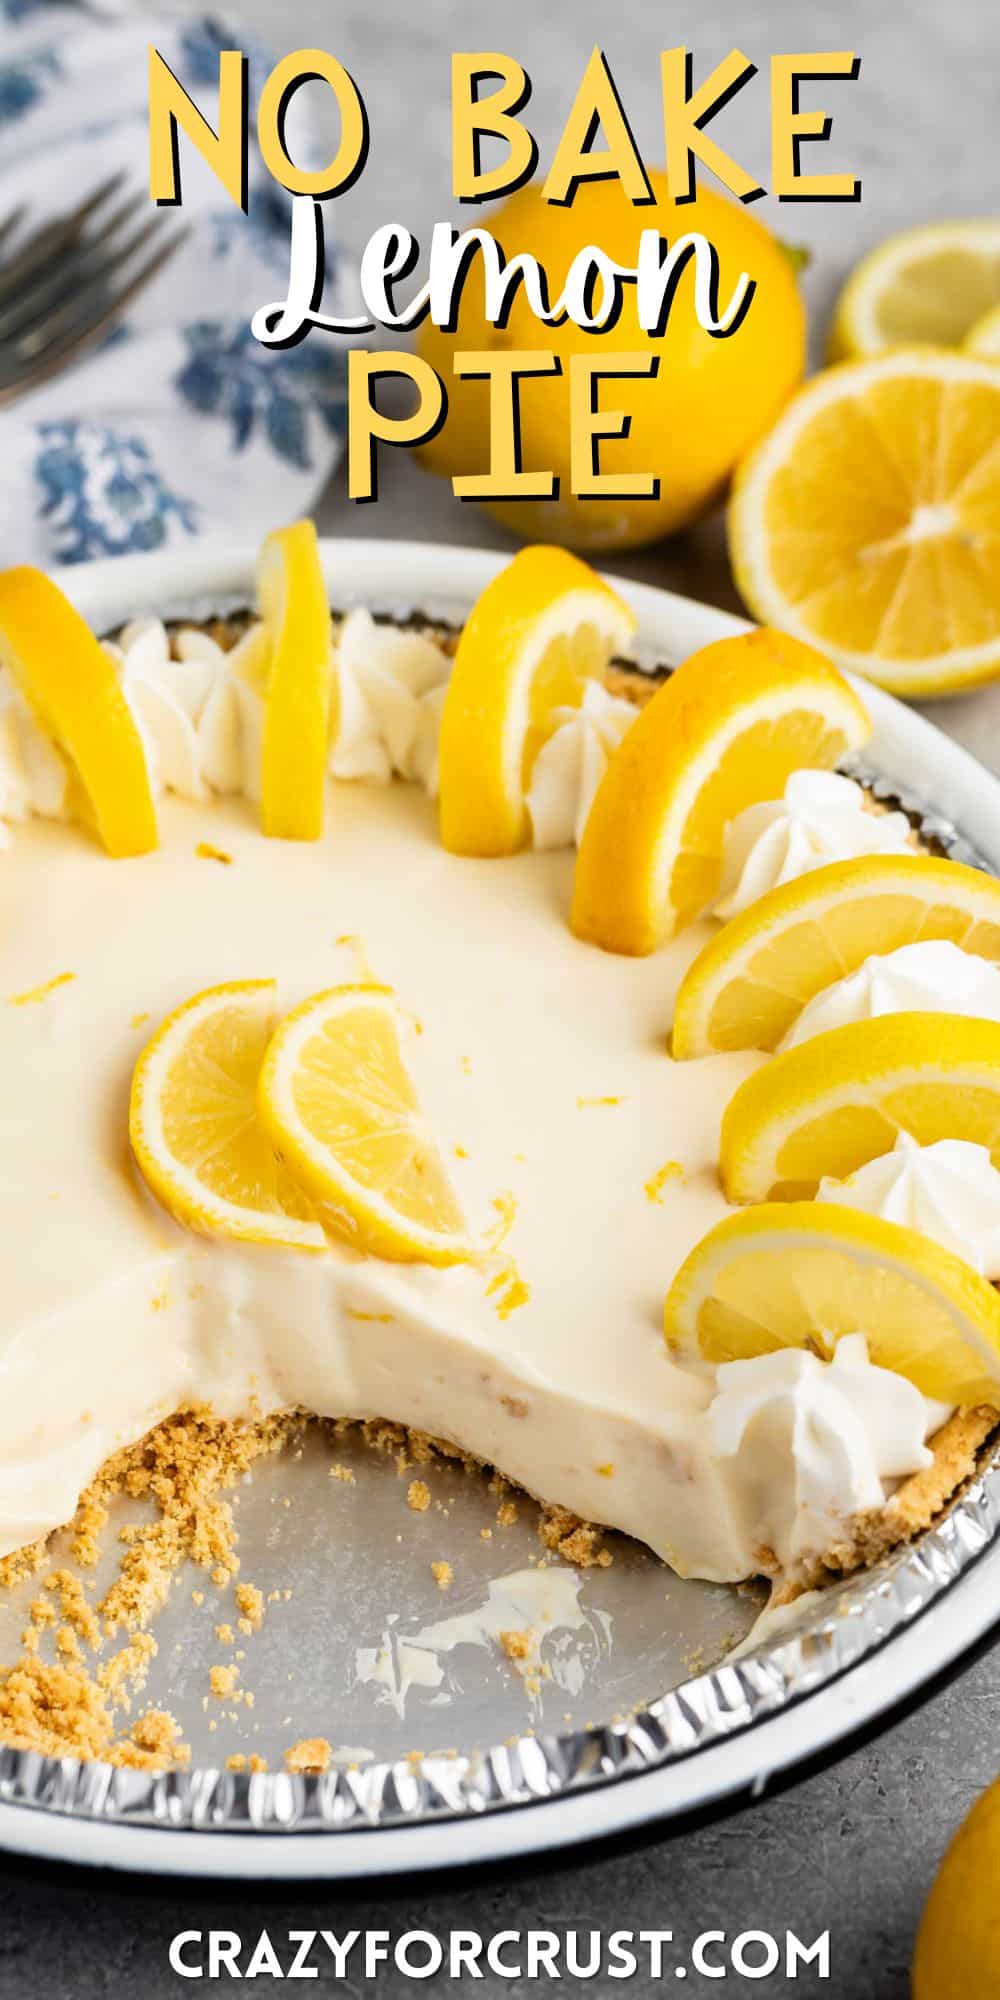 lemon pie in a tin with sliced lemons on top with words on the image.